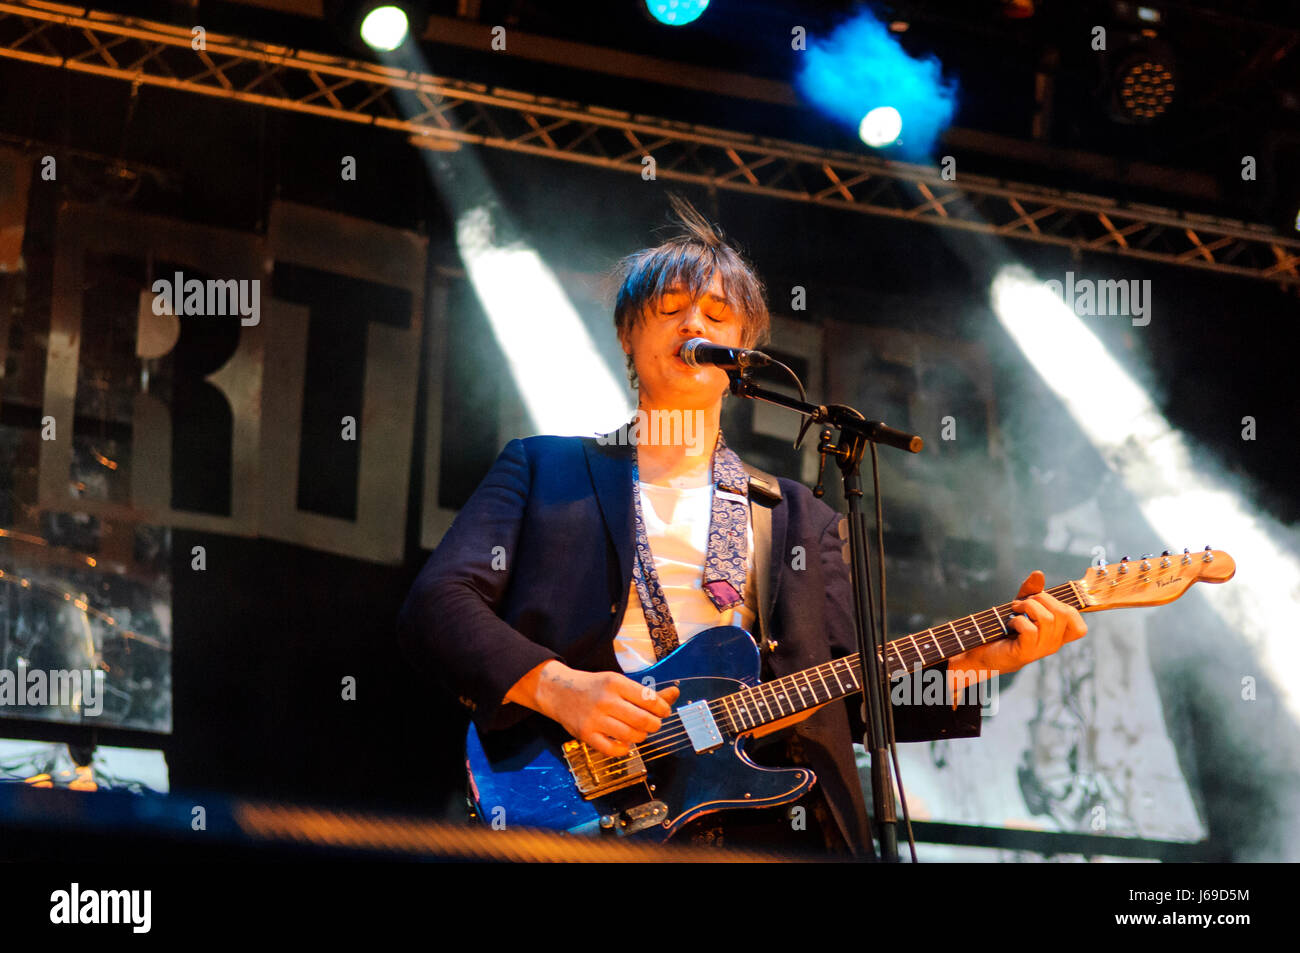 Wirral, UK. 20th May 2017.  For their first concert of 2017, Pete Doherty performs with his band, The Libertines, at Wirral Live, a huge 3 day concert at Prenton Park, Wirral.  The concert is being headlined by Madness on Friday, The Libertines on Saturday, and Little Mix on Sunday.  Supporting artists are Courts, The Rhythm Method, The Farm, The Humingbirds, The Coral, Anton Powers, Bronnie, Mic Lowry and Conor Maynard. © Paul Warburton Stock Photo